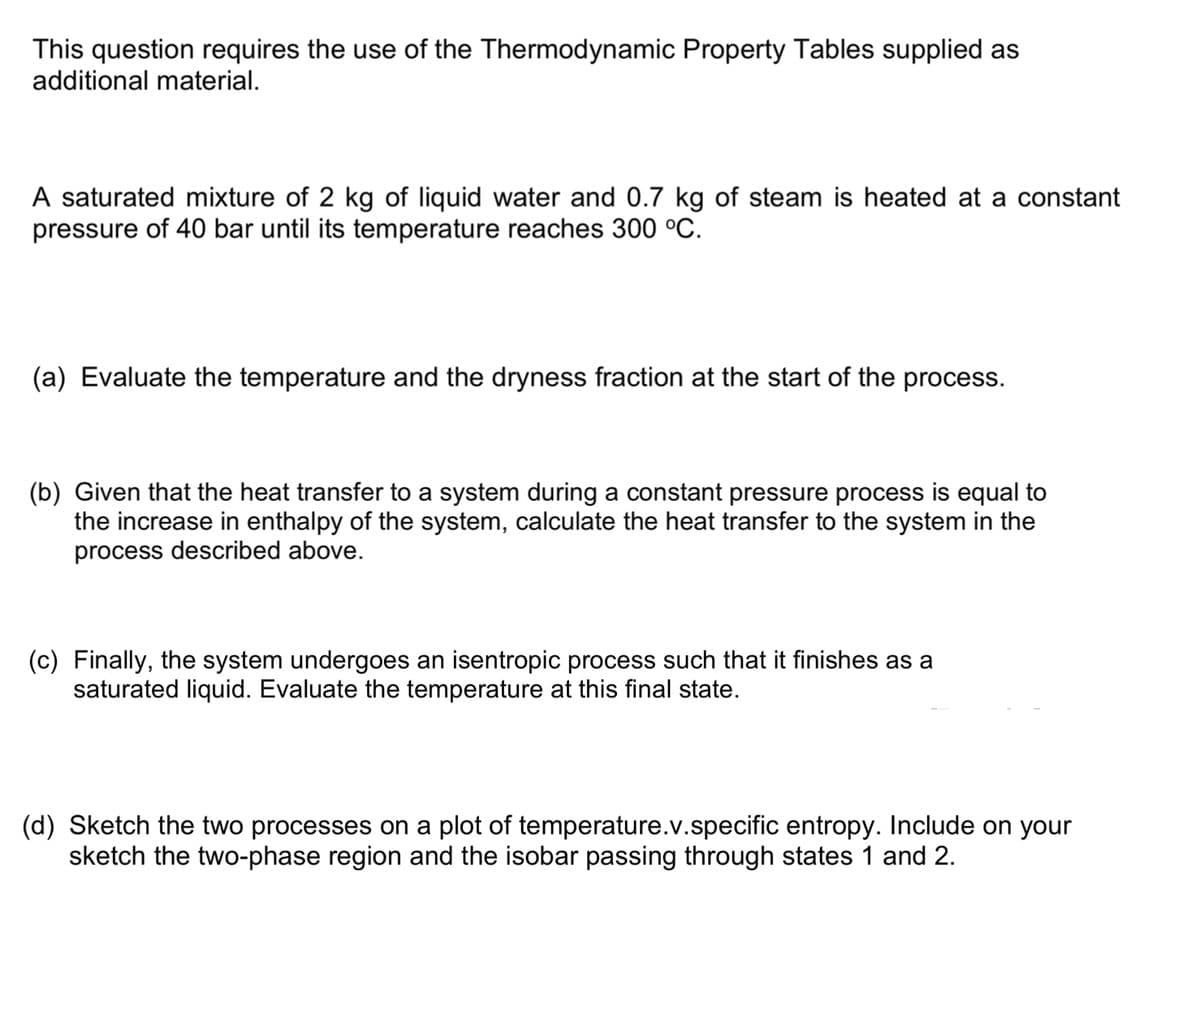 This question requires the use of the Thermodynamic Property Tables supplied as
additional material.
A saturated mixture of 2 kg of liquid water and 0.7 kg of steam is heated at a constant
pressure of 40 bar until its temperature reaches 300 °C.
(a) Evaluate the temperature and the dryness fraction at the start of the process.
(b) Given that the heat transfer to a system during a constant pressure process is equal to
the increase in enthalpy of the system, calculate the heat transfer to the system in the
process described above.
(c) Finally, the system undergoes an isentropic process such that it finishes as a
saturated liquid. Evaluate the temperature at this final state.
(d) Sketch the two processes on a plot of temperature.v.specific entropy. Include on your
sketch the two-phase region and the isobar passing through states 1 and 2.